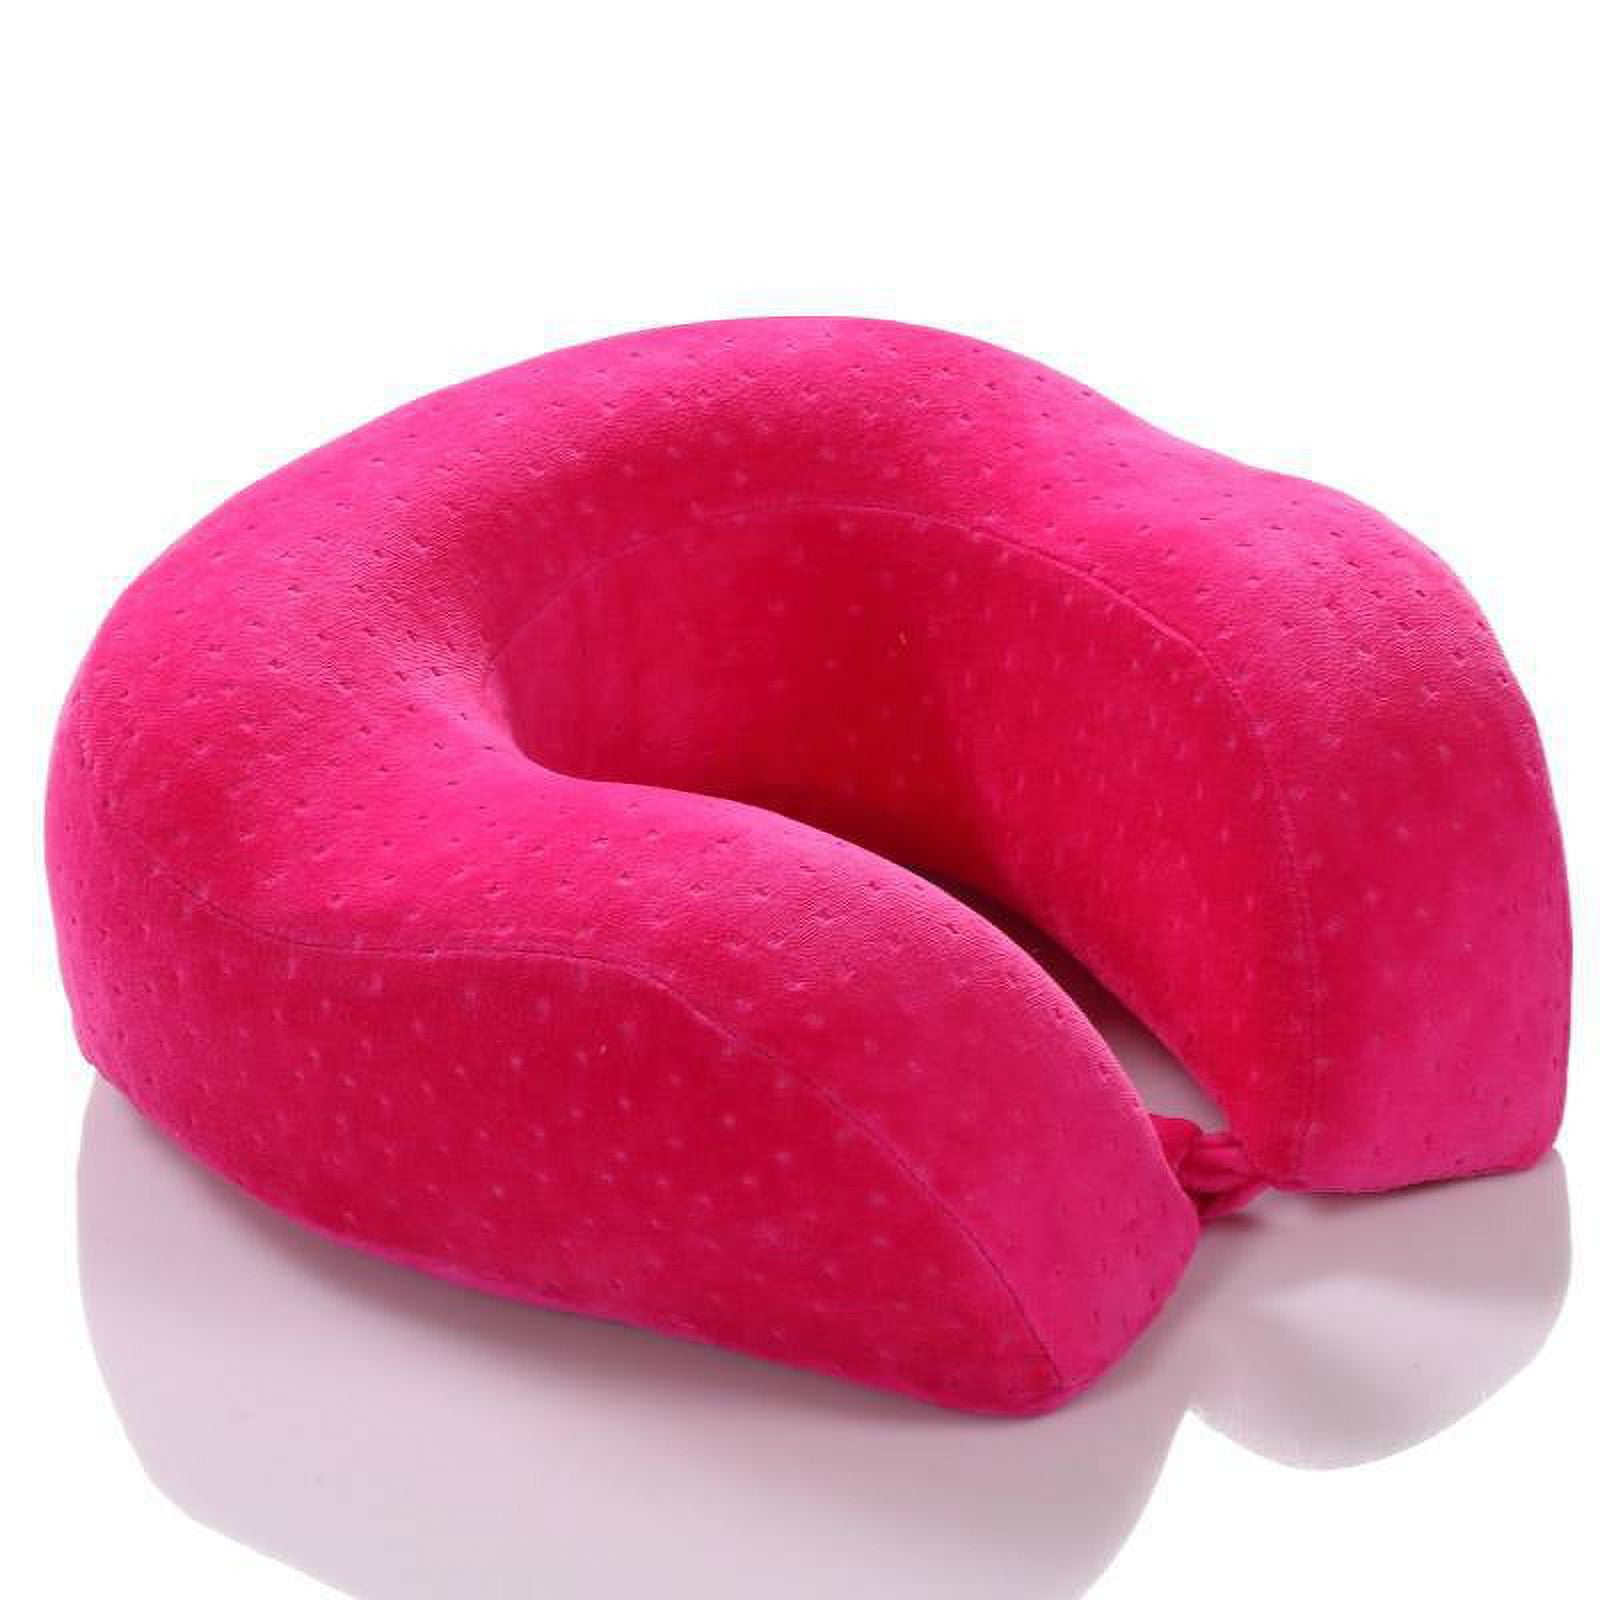 Noarlalf Seat Cushion Travel Neck Pillow Memory Foam Airplane Travel  Comfortable Washable Cover Plane Neck Support Pillow for Neck Sleeping Chair  Cushions 28*24*8 